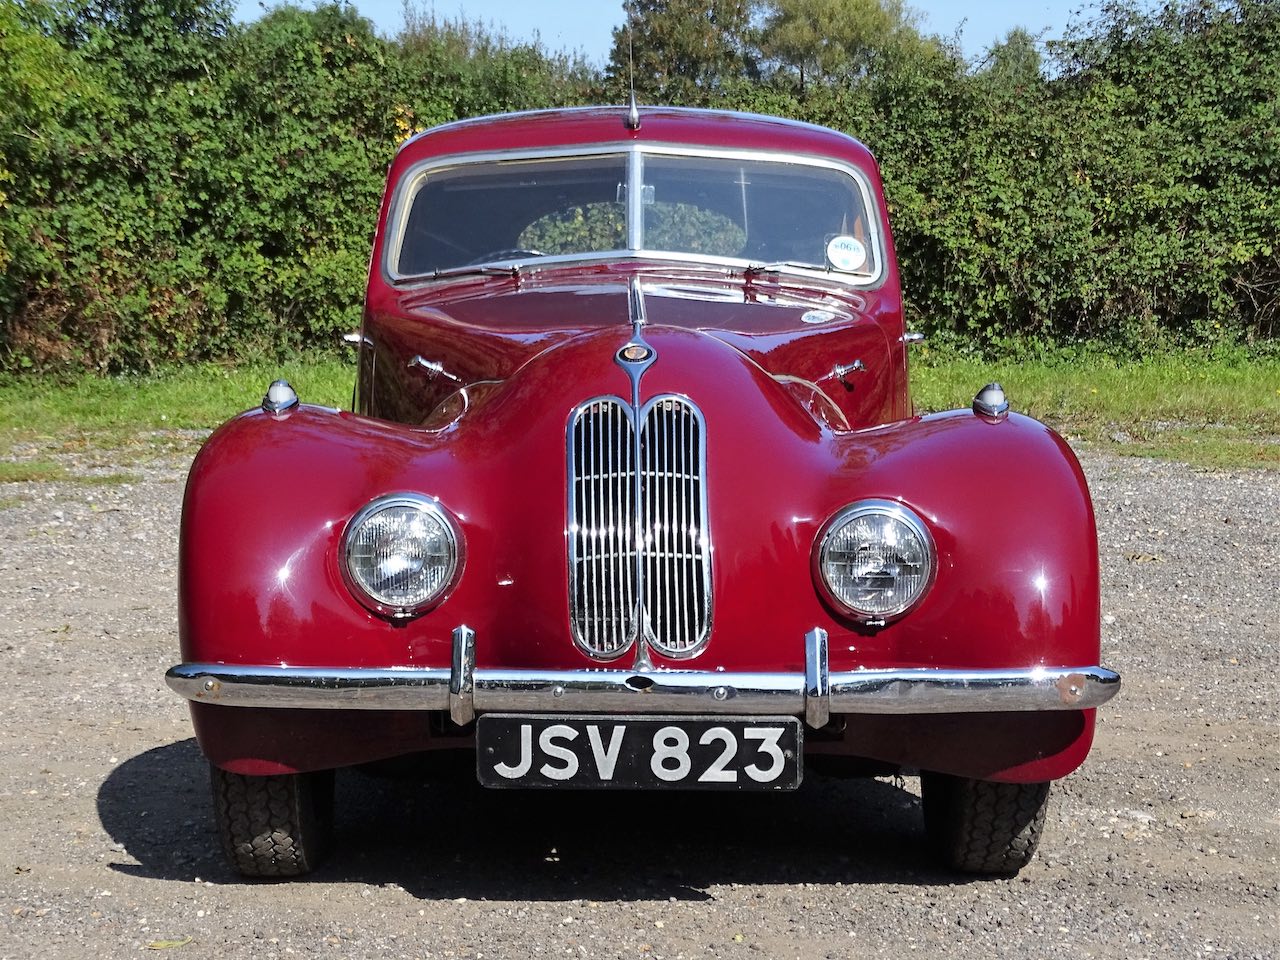 1948 Bristol 400 with links to Bristol Cars up for grabs